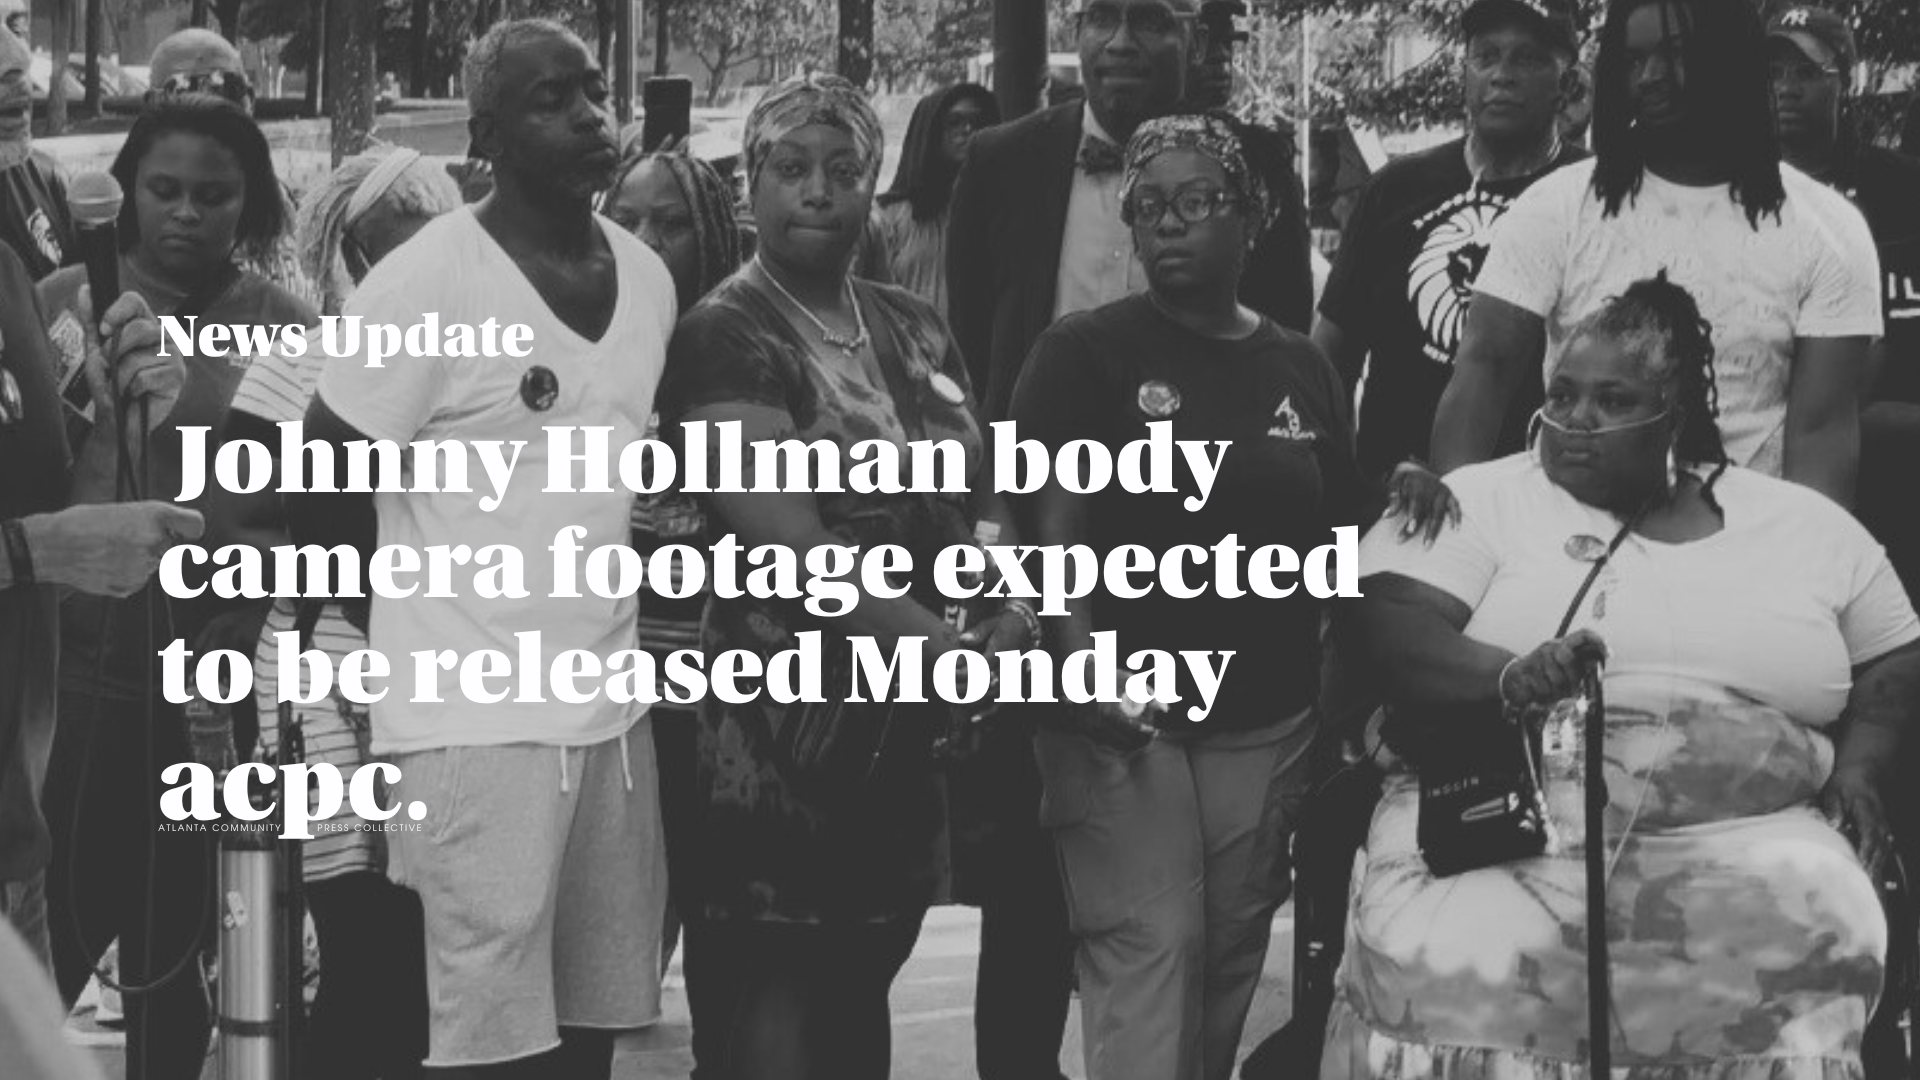 Hollman family attorneys say body camera footage will be public Monday